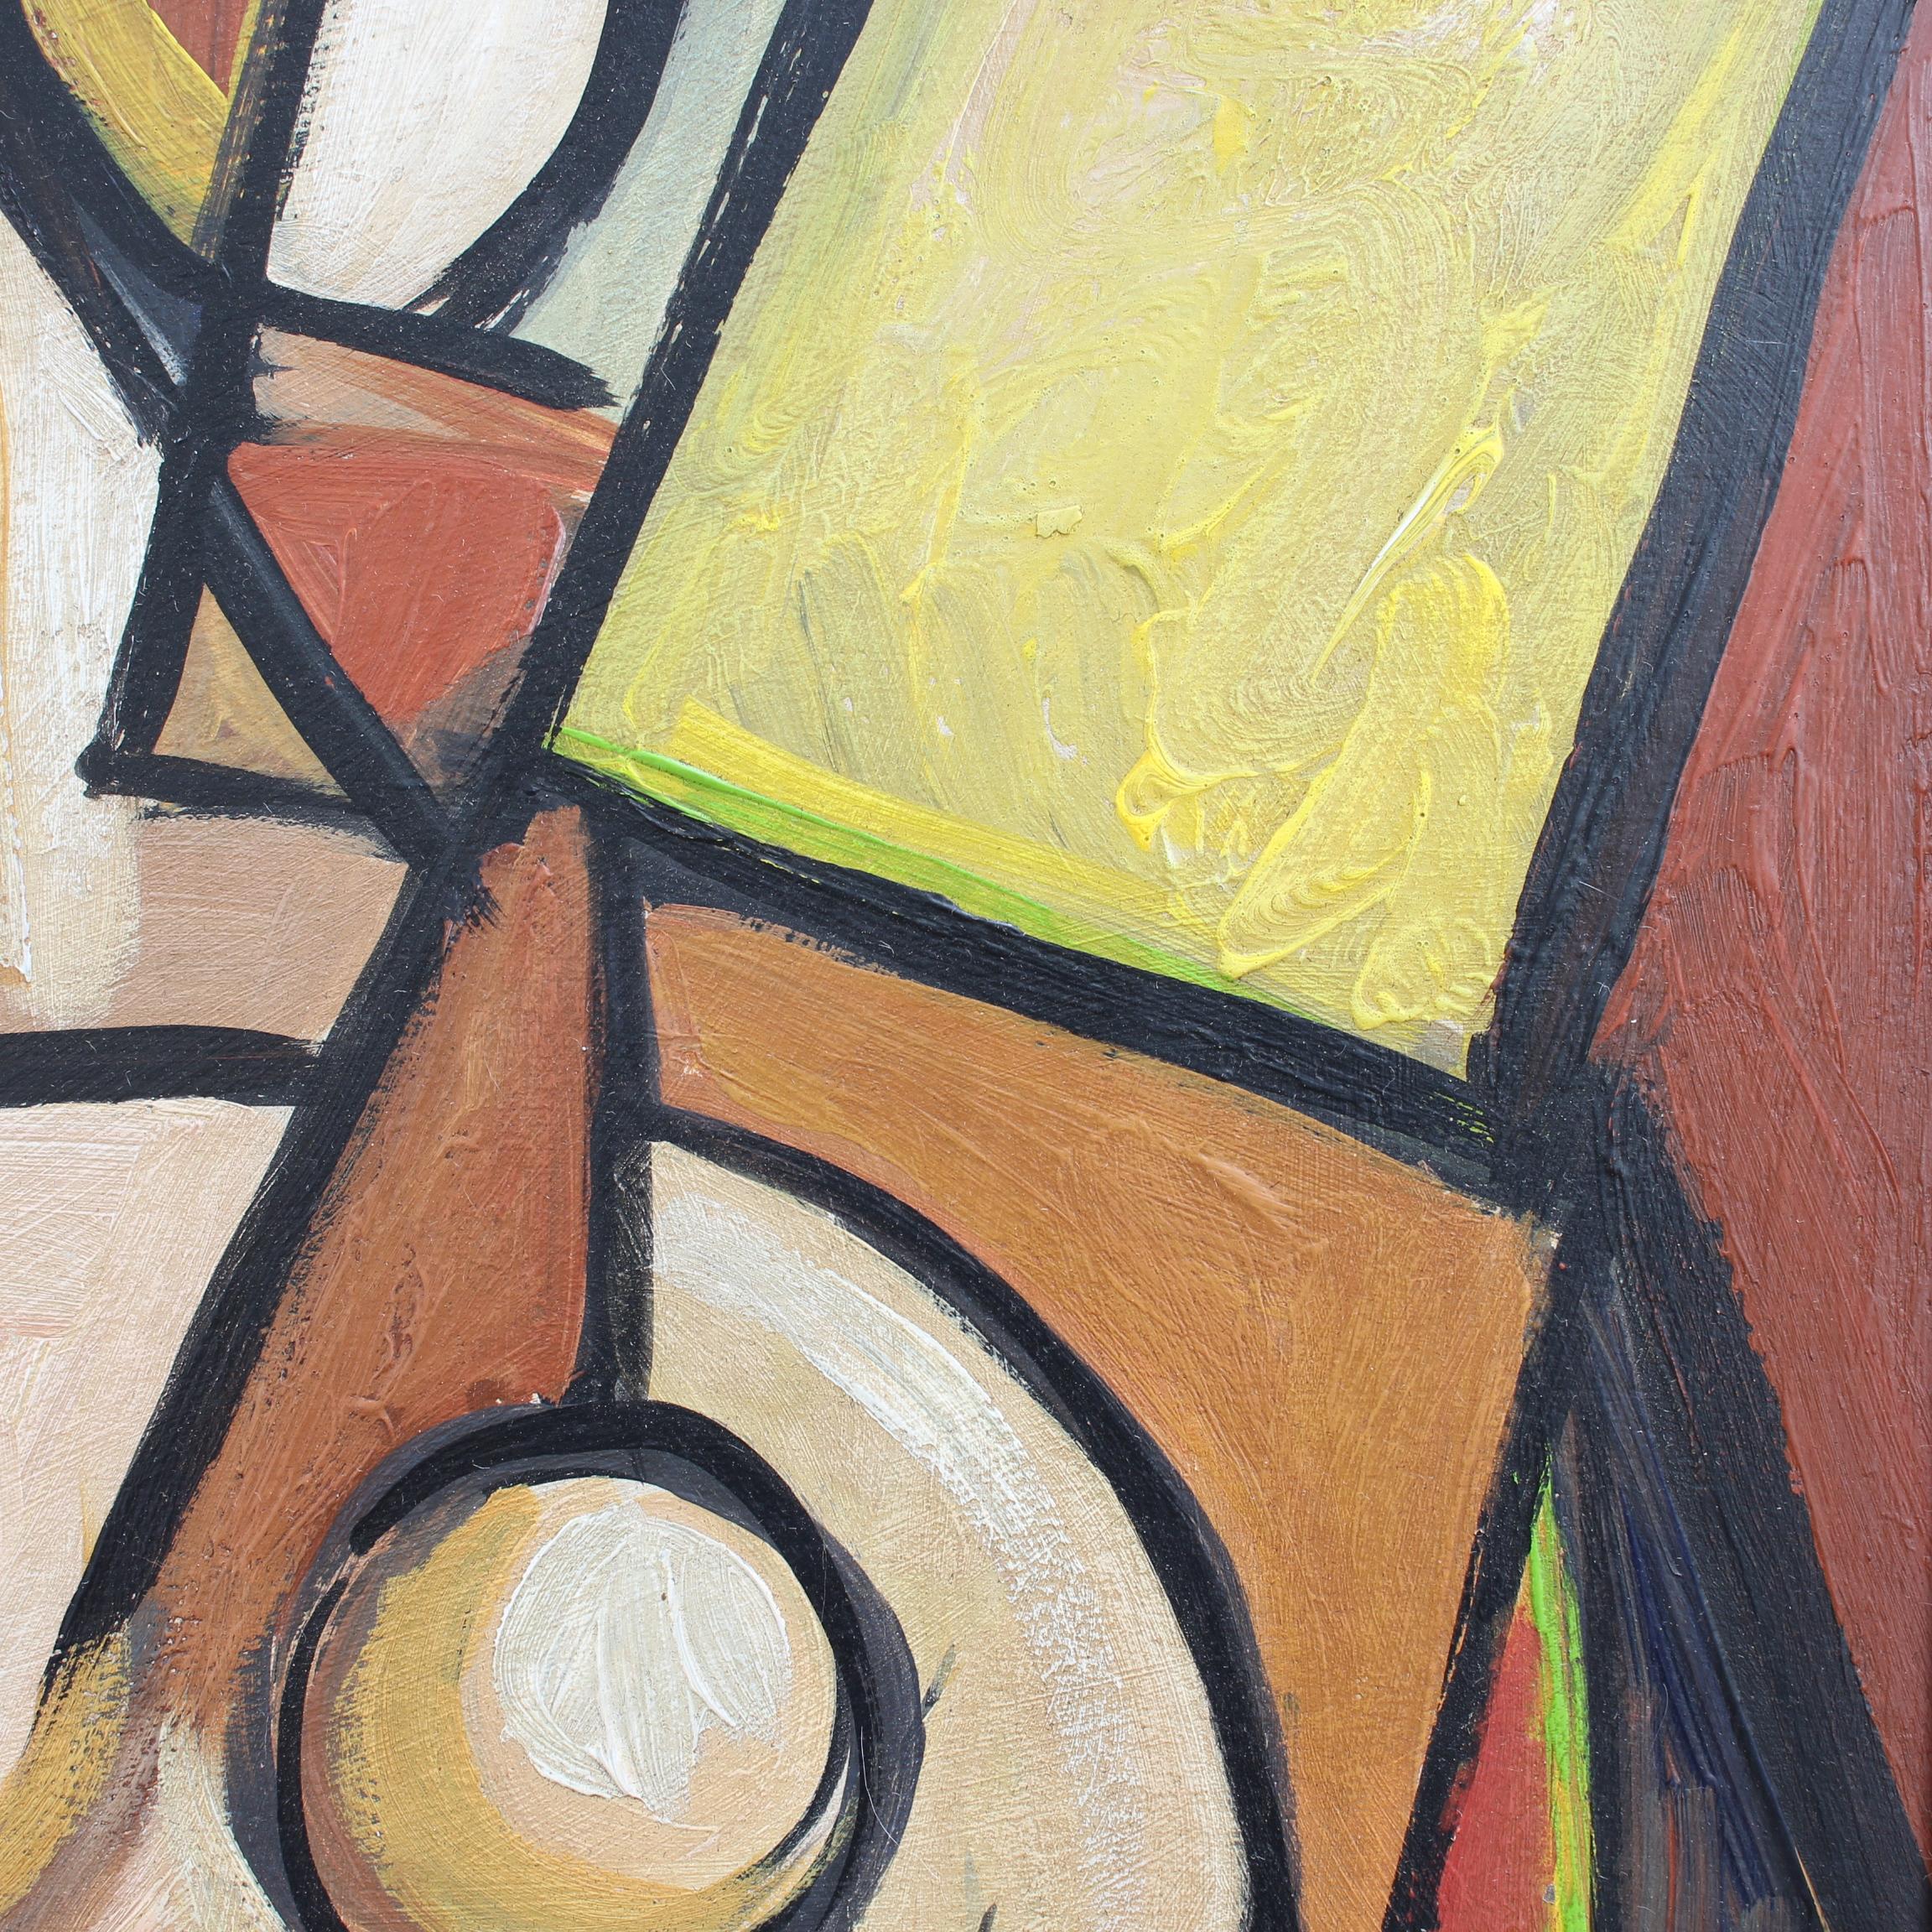 'Standing Cubist Nude', oil on board, by artist with the initials STM (circa 1950s-70s). A splendid cubist depiction, this is a sizeable portrait of a standing nude figure in geometric perspective. The earth-tone hues - brown, beige, yellow,